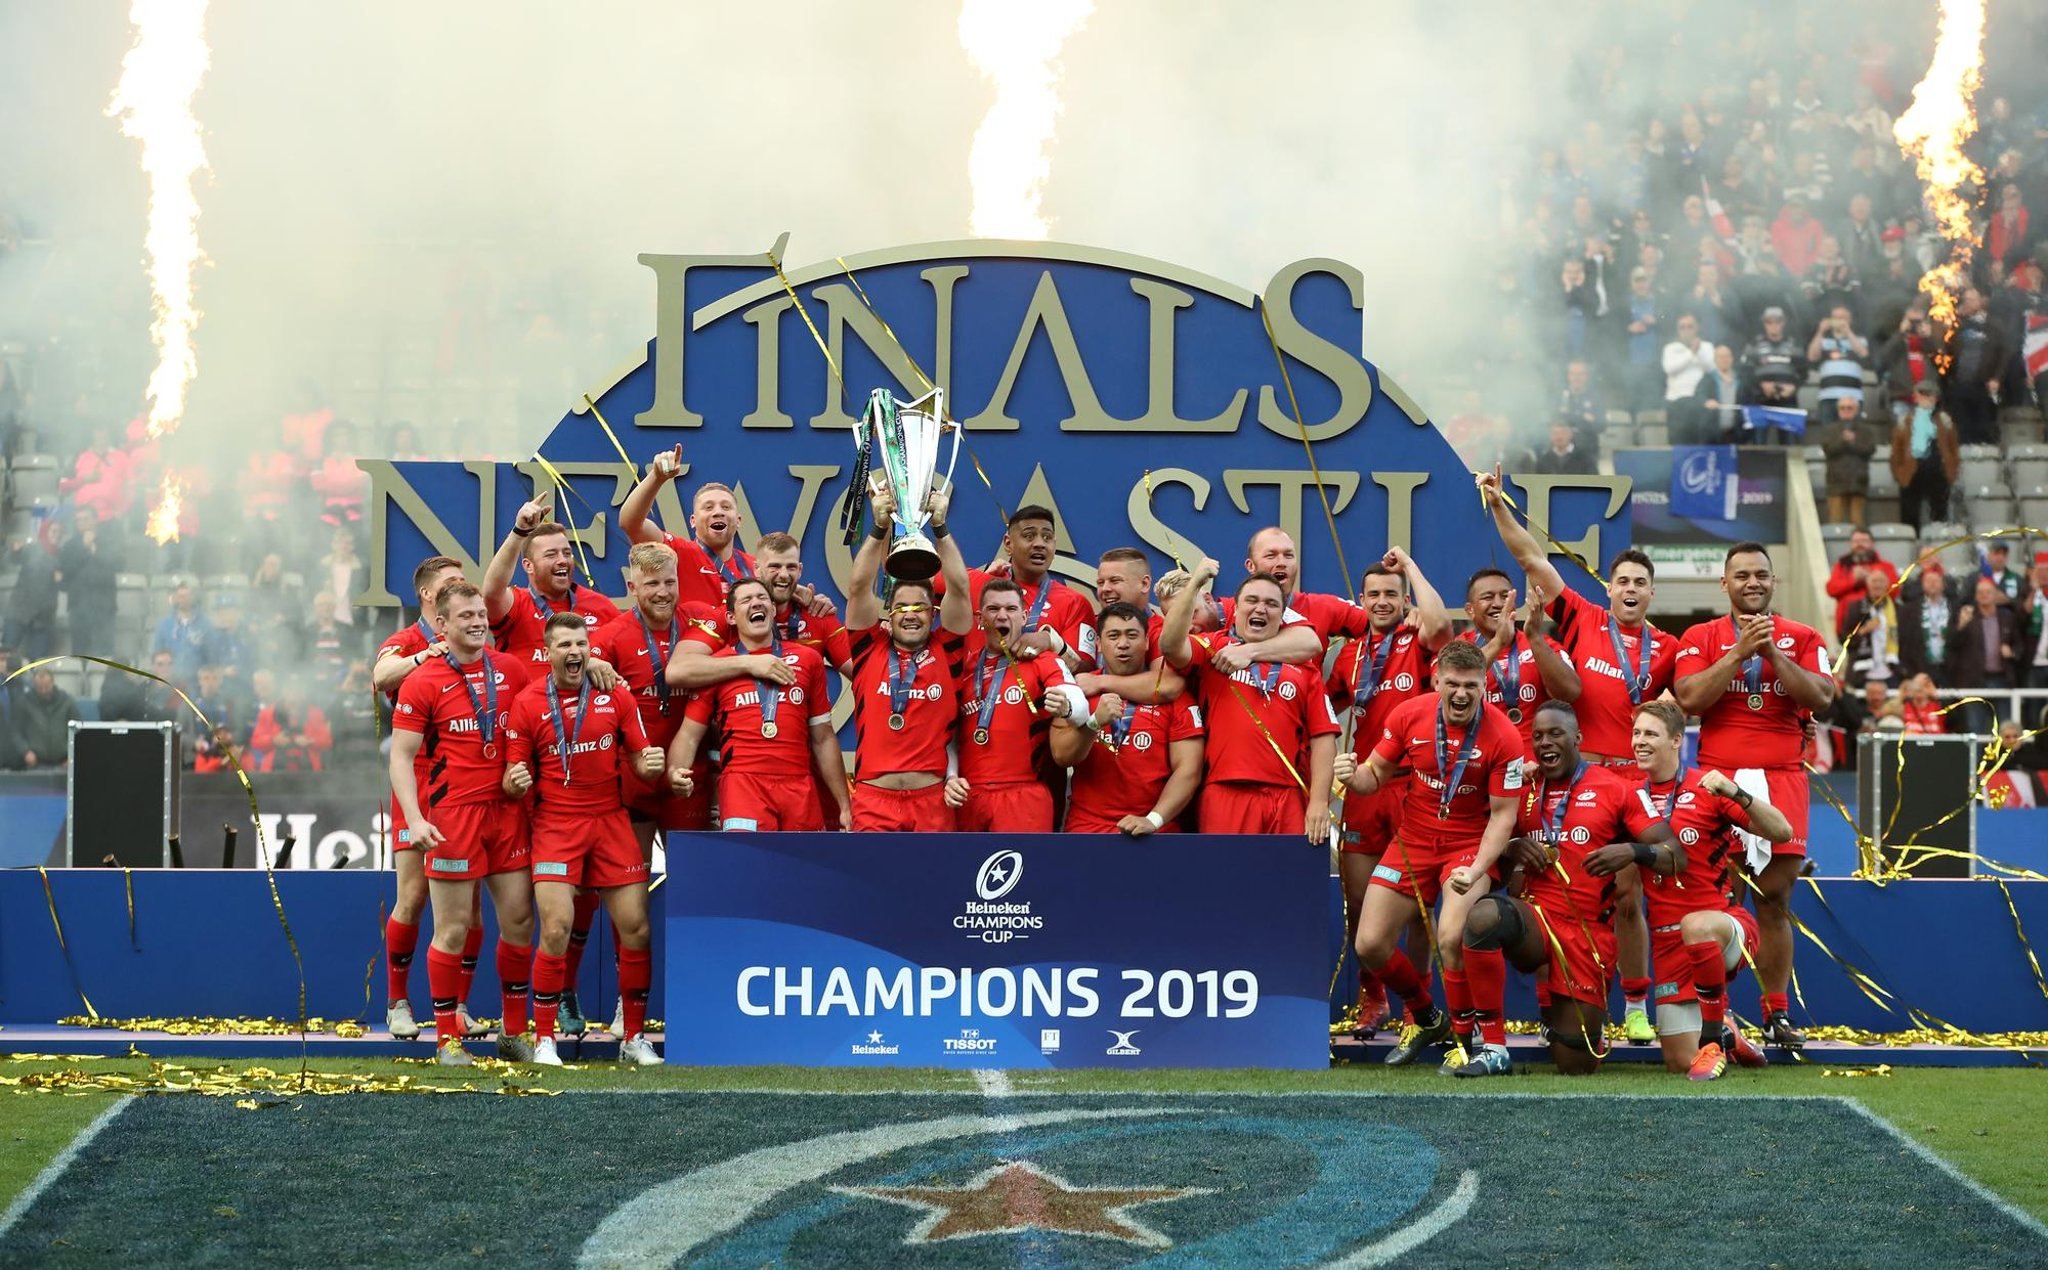 Revealed Radical New Format For 21 Heineken Champions Cup The Scotsman